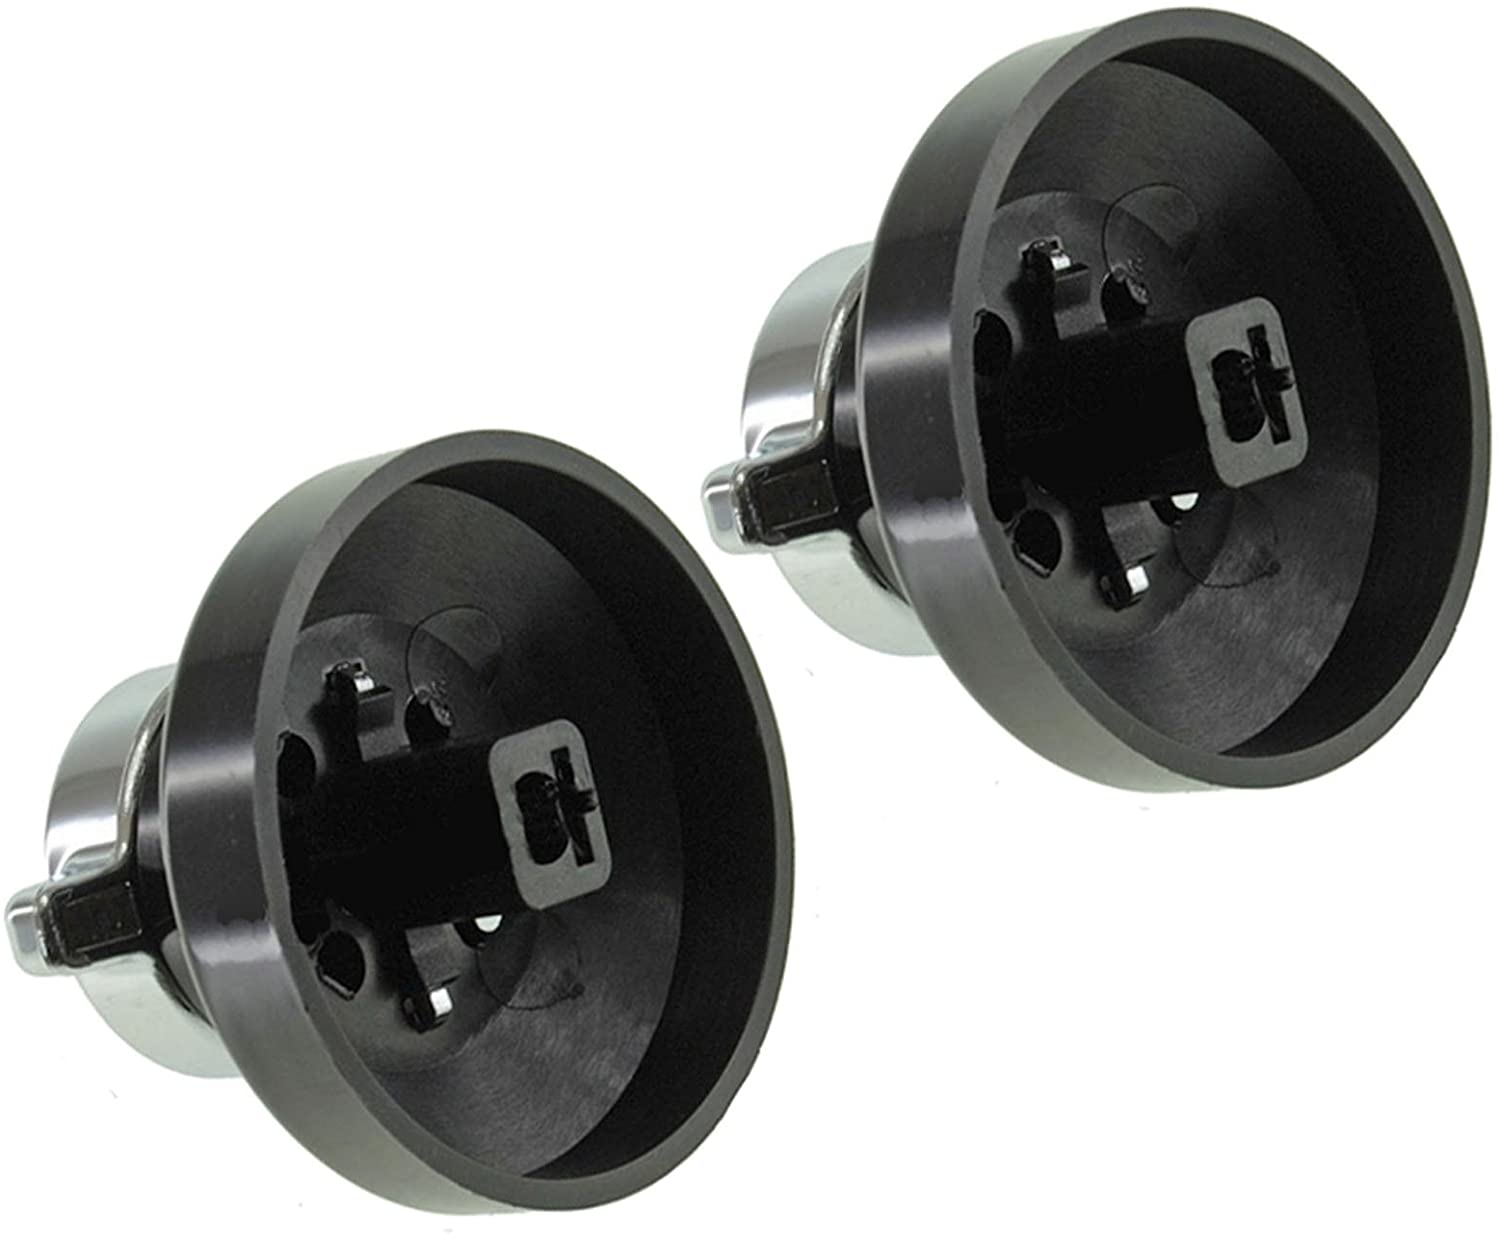 2 x Black Silver Knobs Switch for NEW WORLD 444440036 600SIDLM Gas Oven Cooker Hob